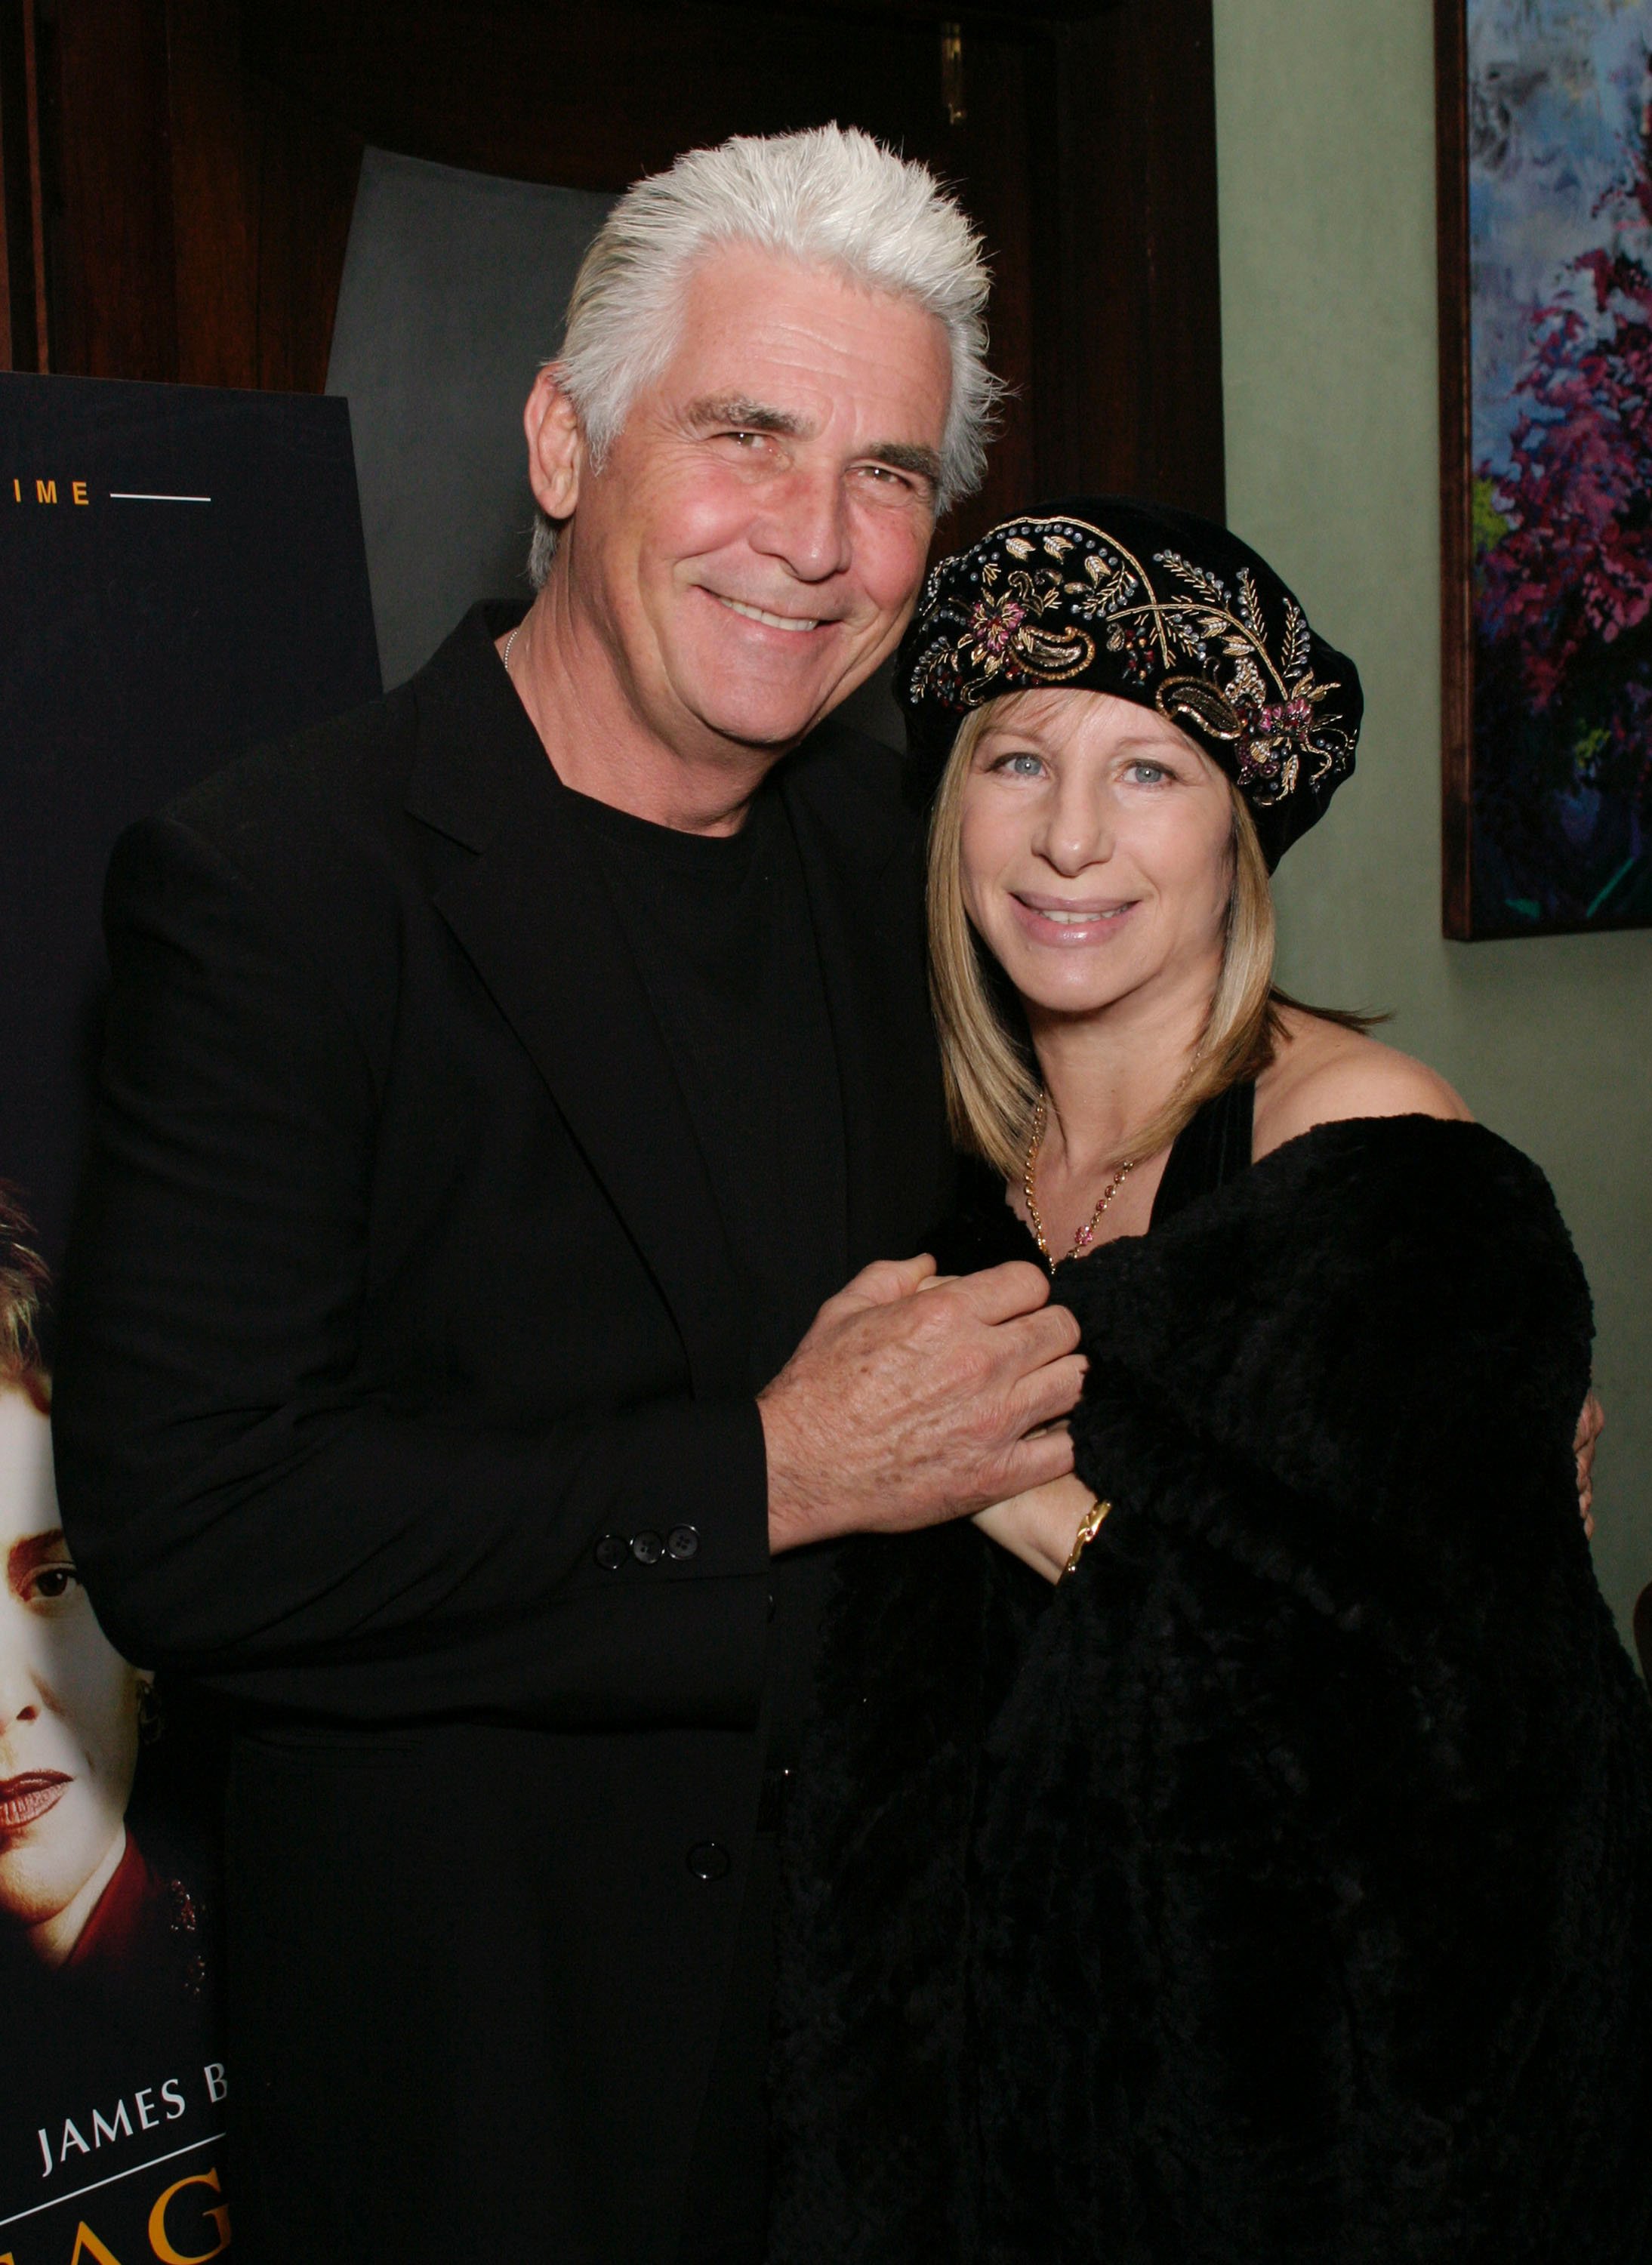 James Brolin and Barbra Streisand at Showtime's Pre-Golden Globe Party on January 24, 2004, in Hollywood, California | Source: Getty Images